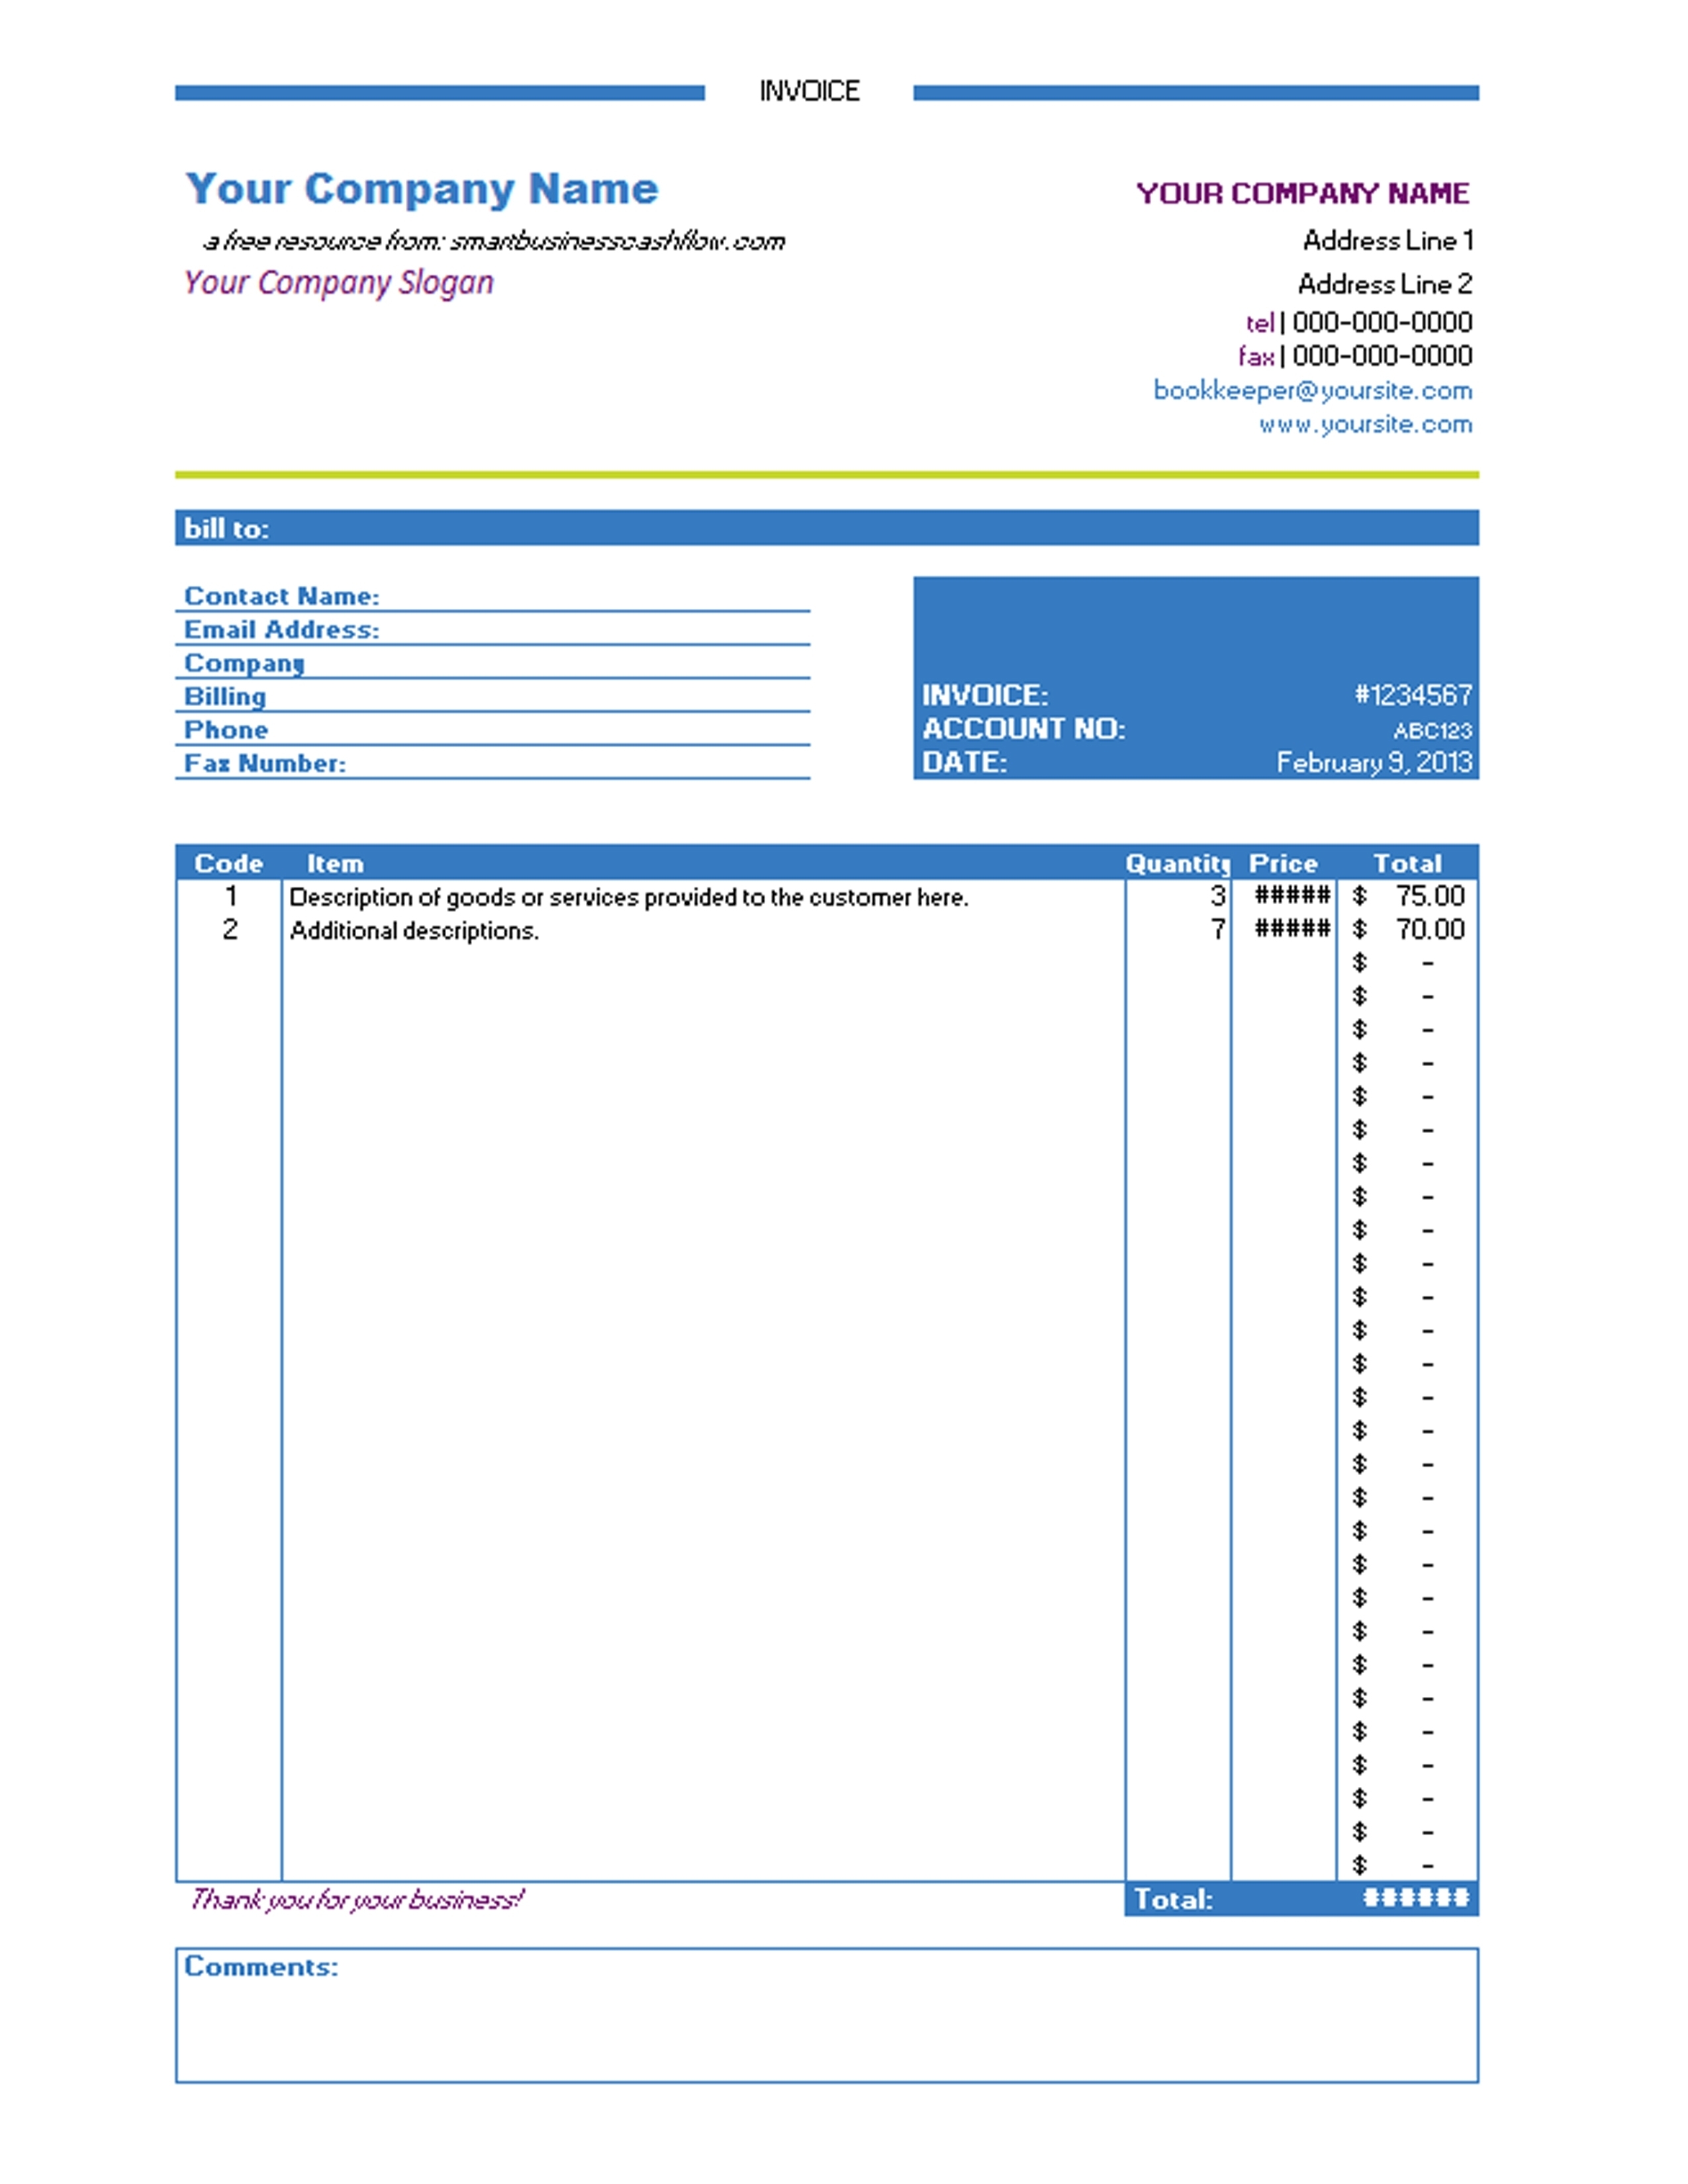 invoice excel template free invoice template free 2016 invoice template free download excel